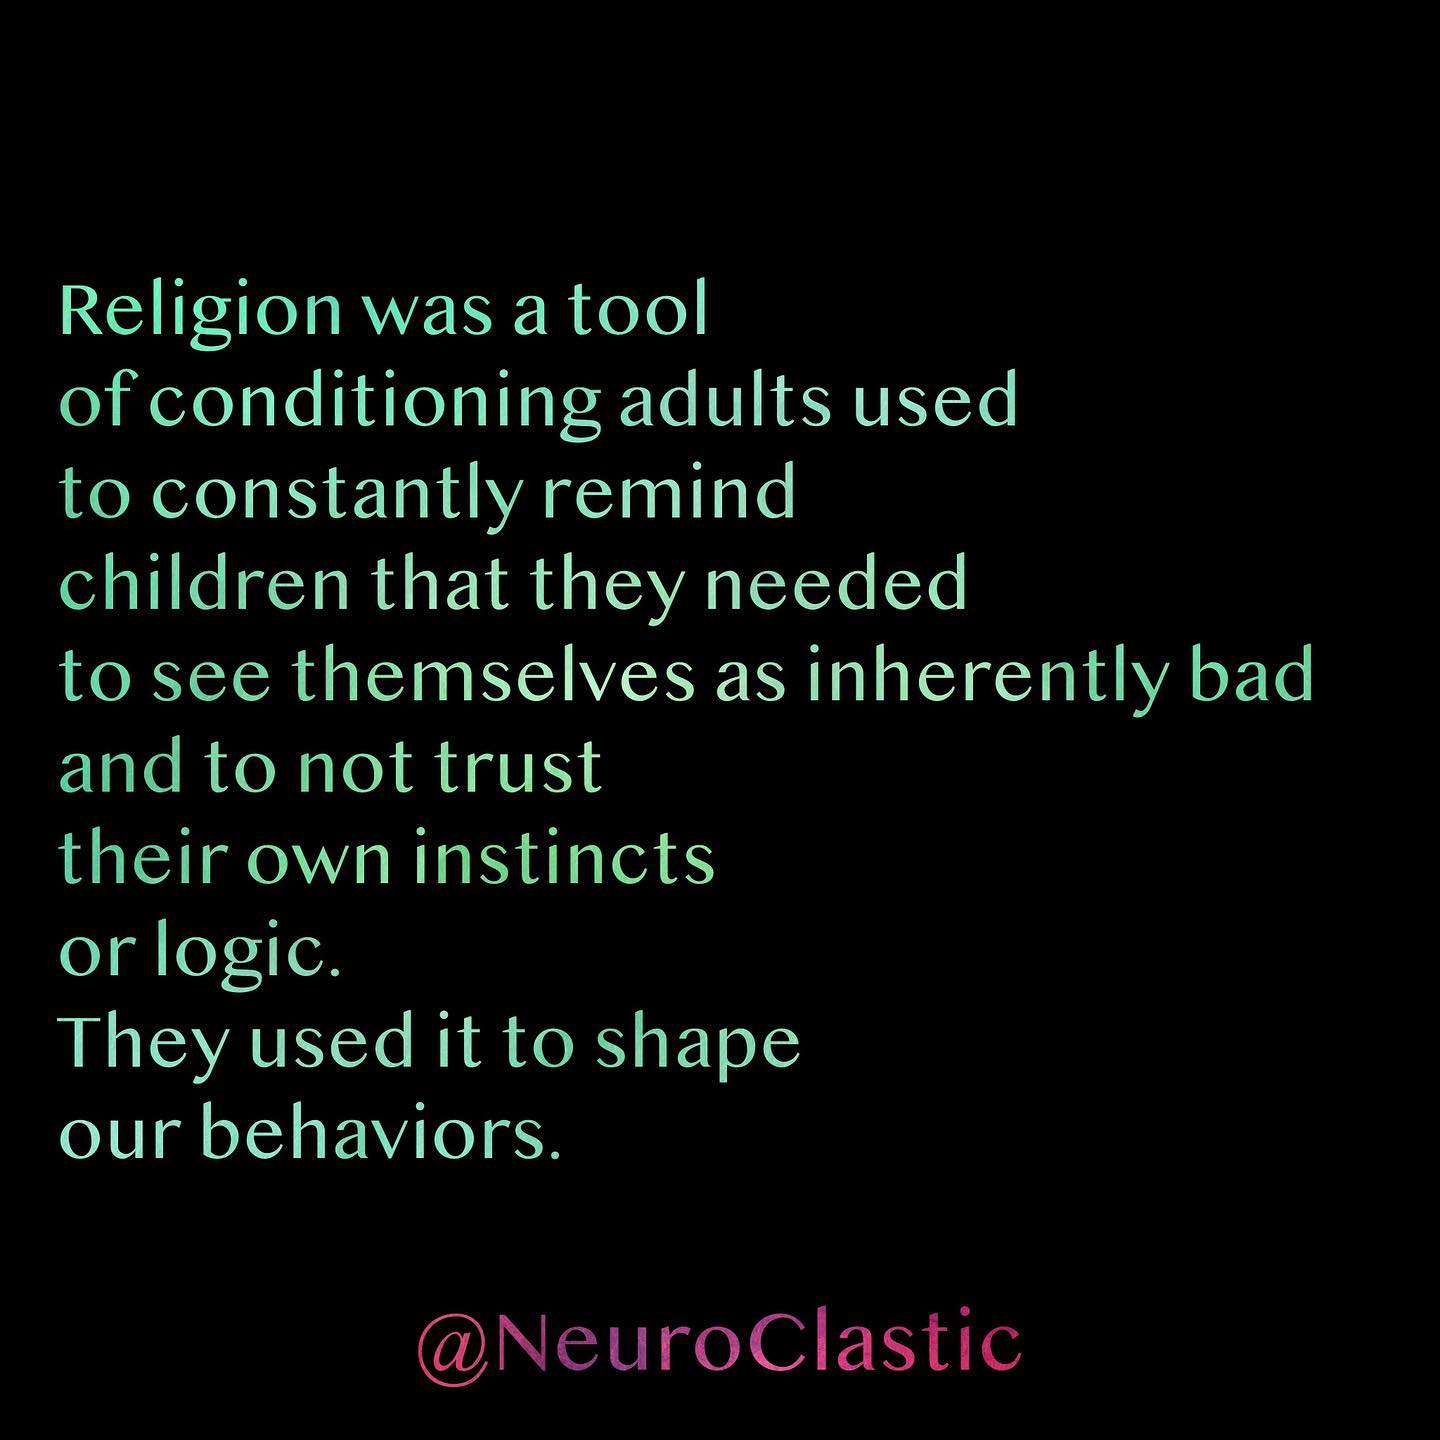 Religion was a tool of conditioning adults used to constantly remind children that they needed to see themselves as inherently bad and to not trust their own instincts or logic. They used it to shape our behaviors. @NeuroClastic